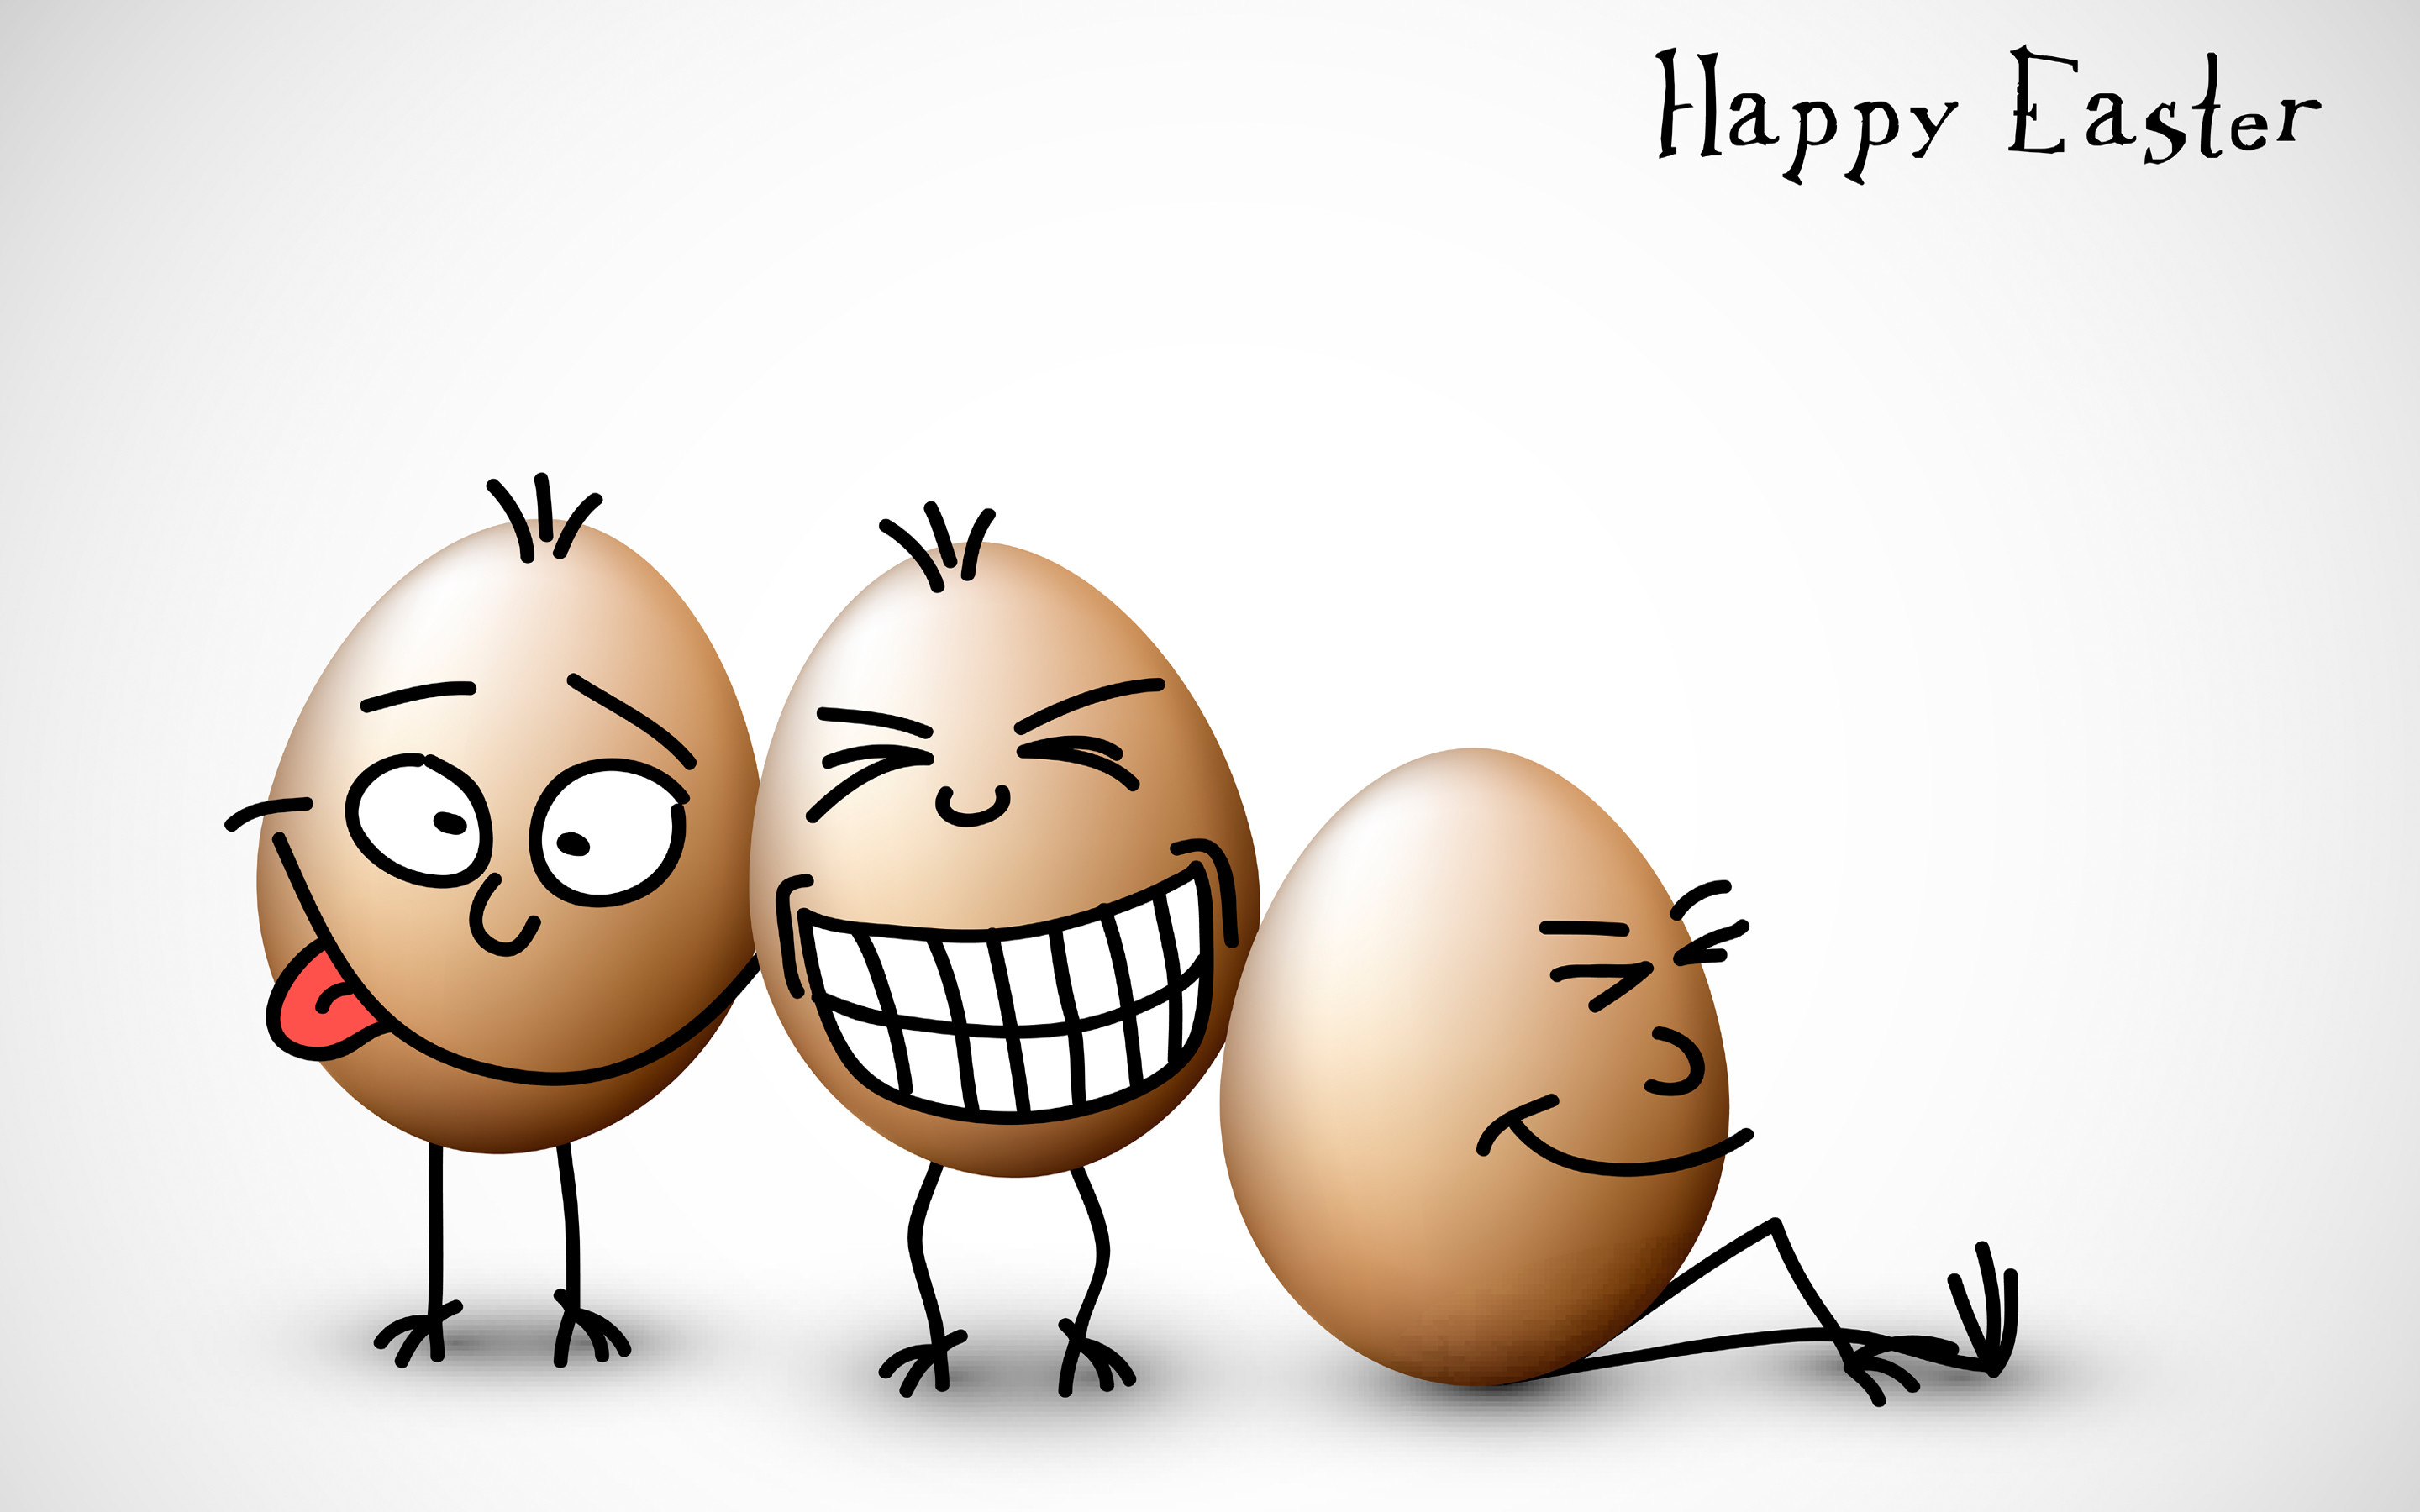 2880x Funny Easter Wallpaper Data Id 252124 Easter Wishes Funny